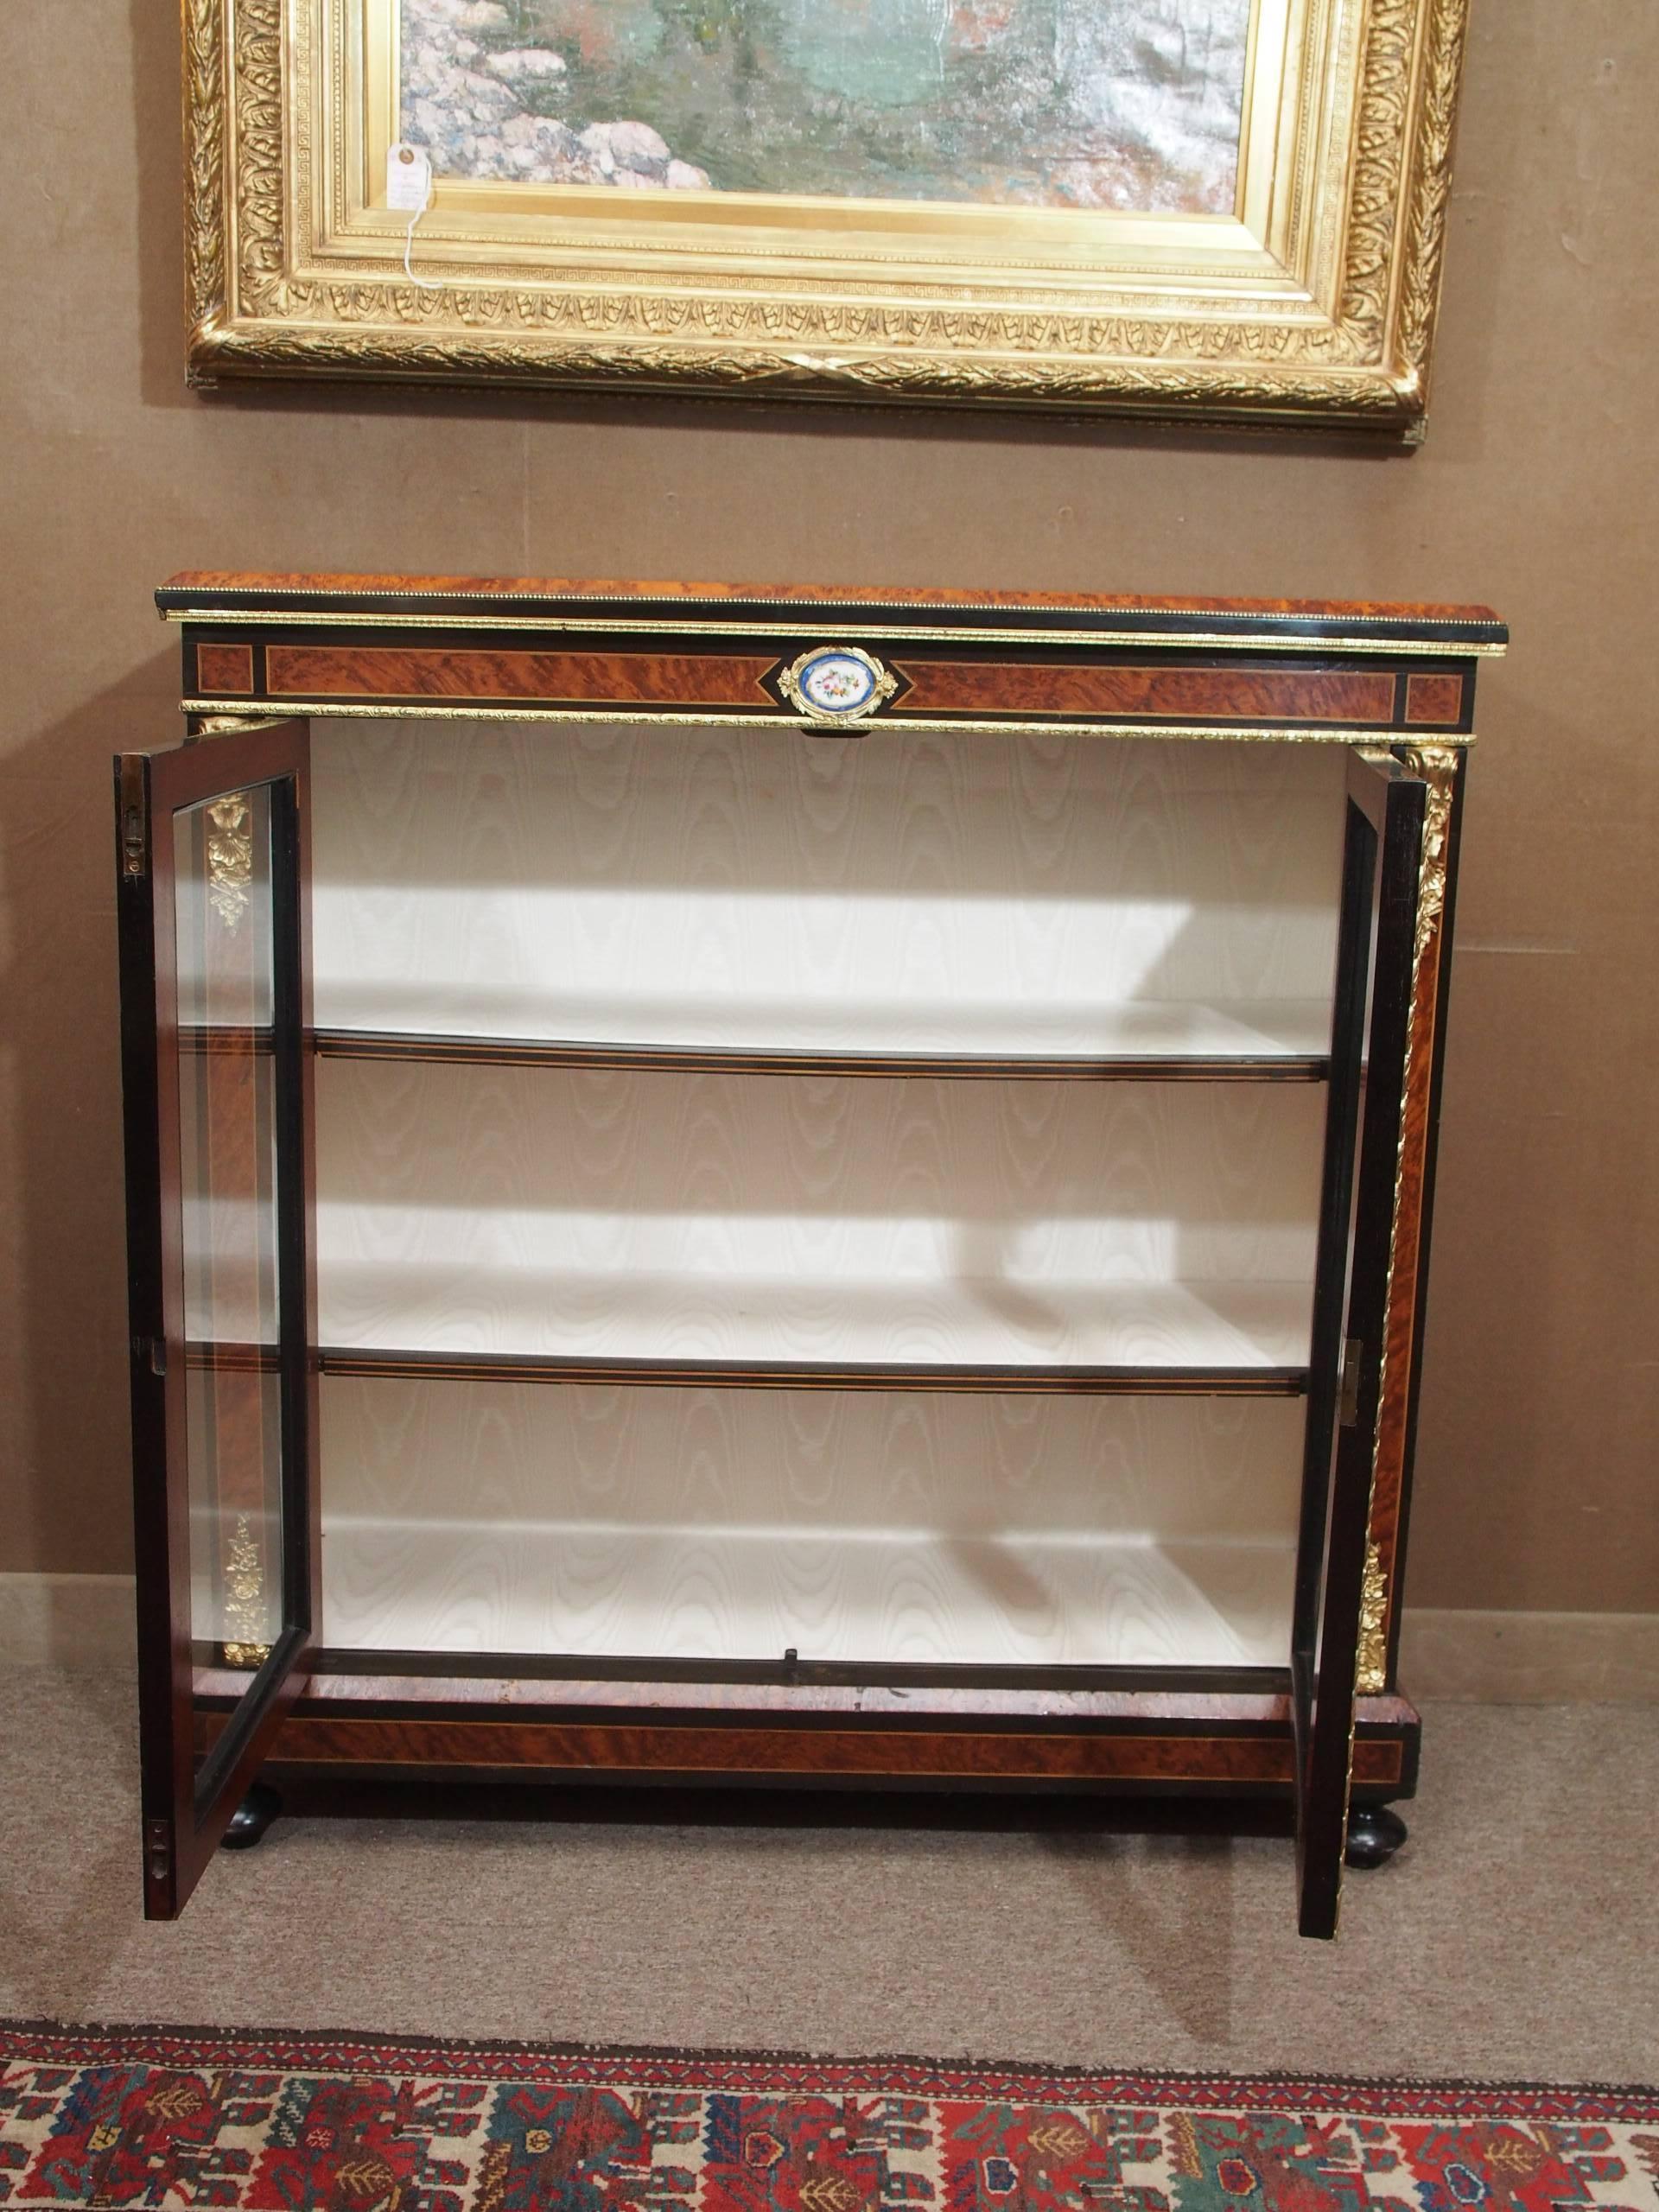 Antique English Briarwood and Ebonized Cabinet In Excellent Condition For Sale In New Orleans, LA